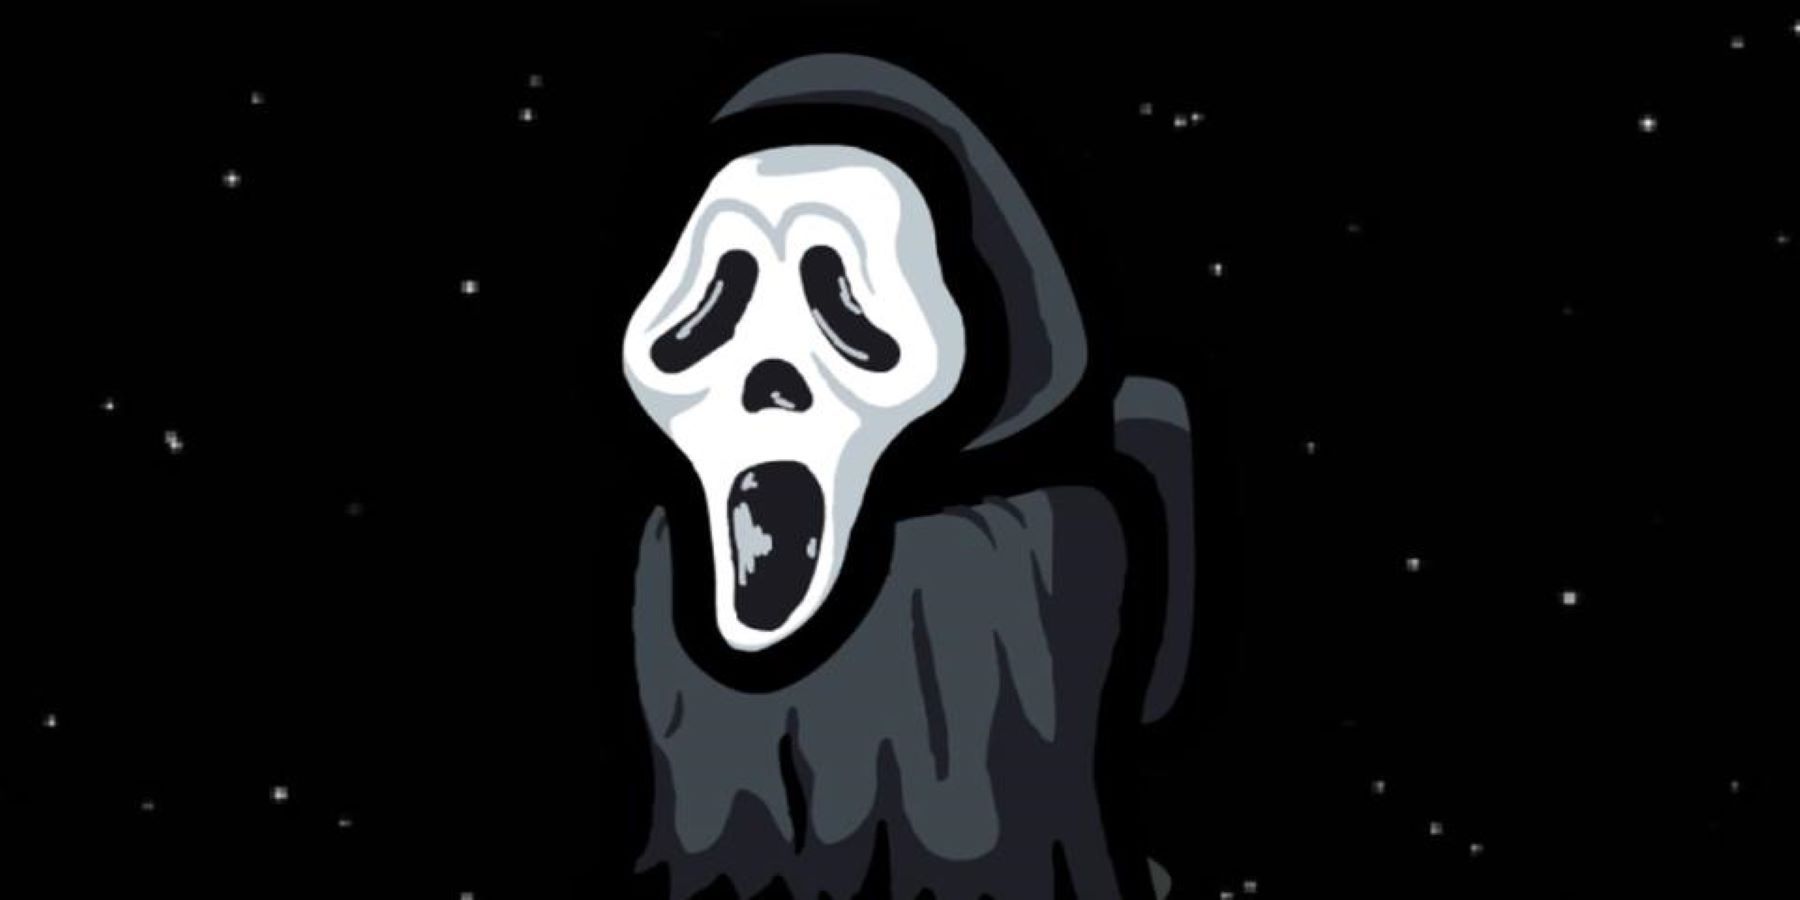 Ghostface from Scream as a skin in Among Us